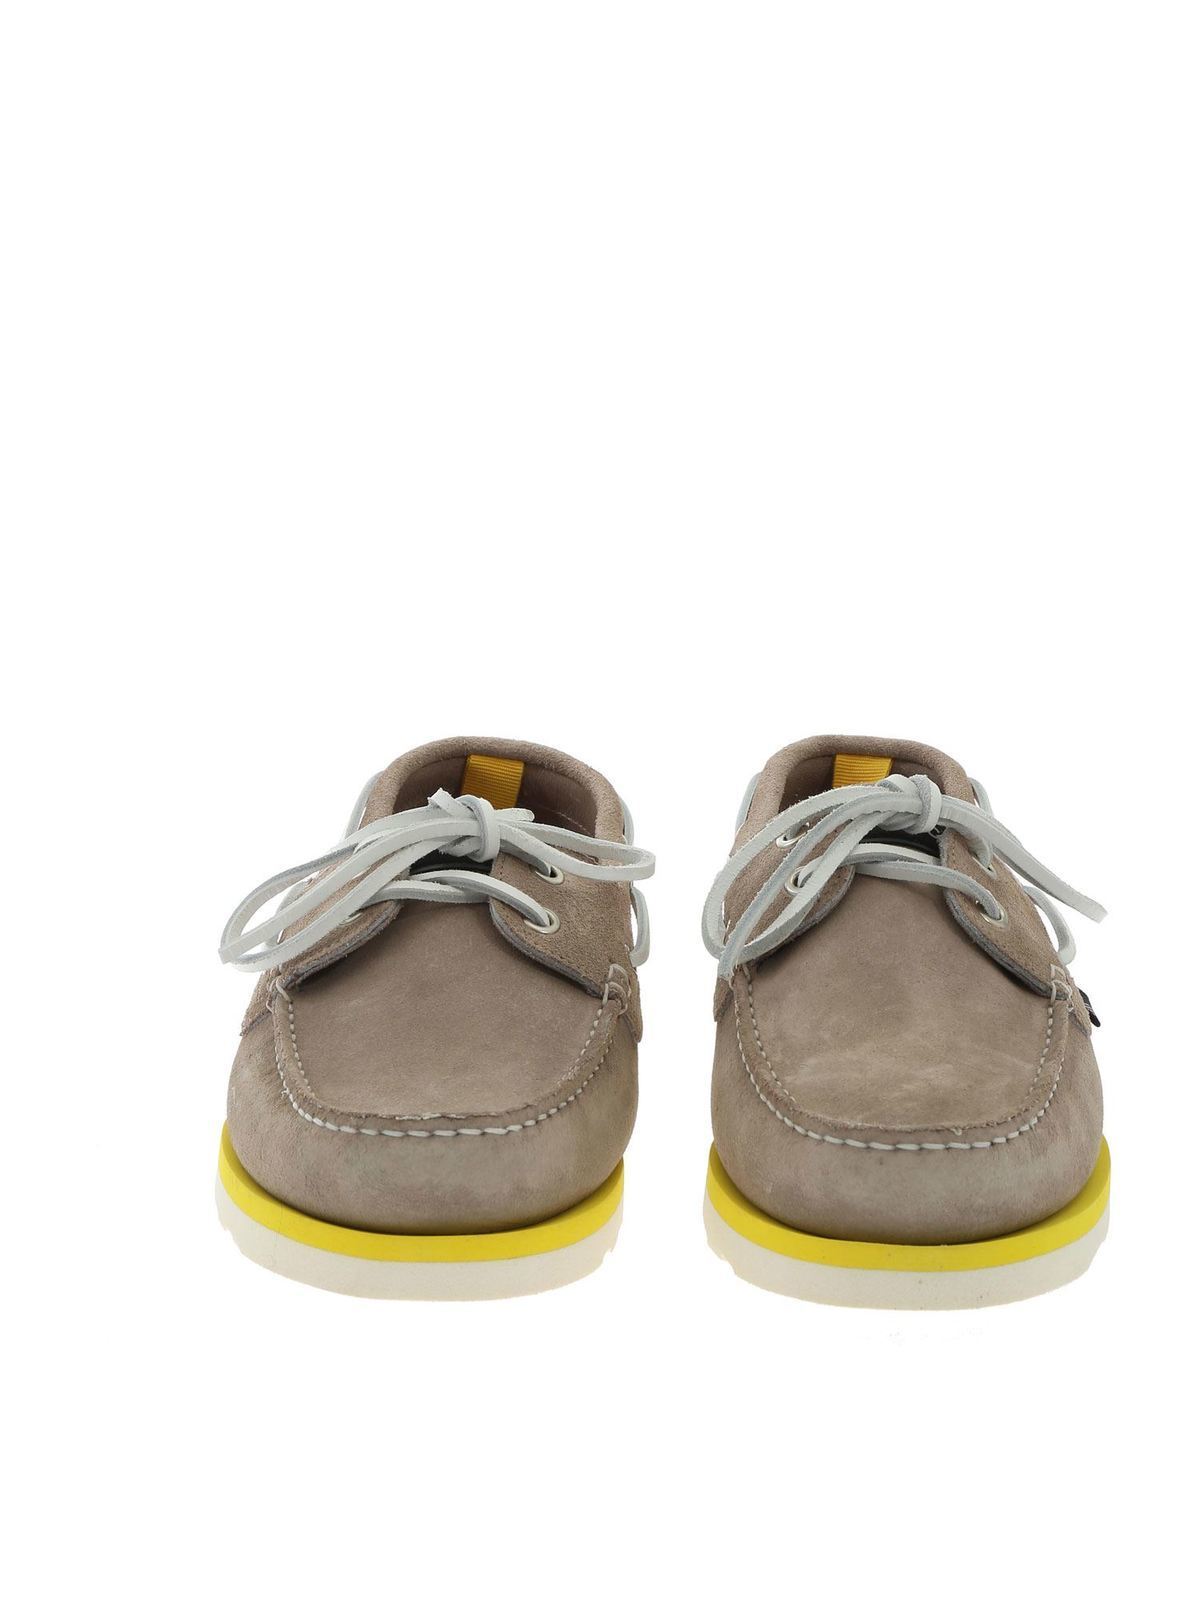 boat shoes slippers